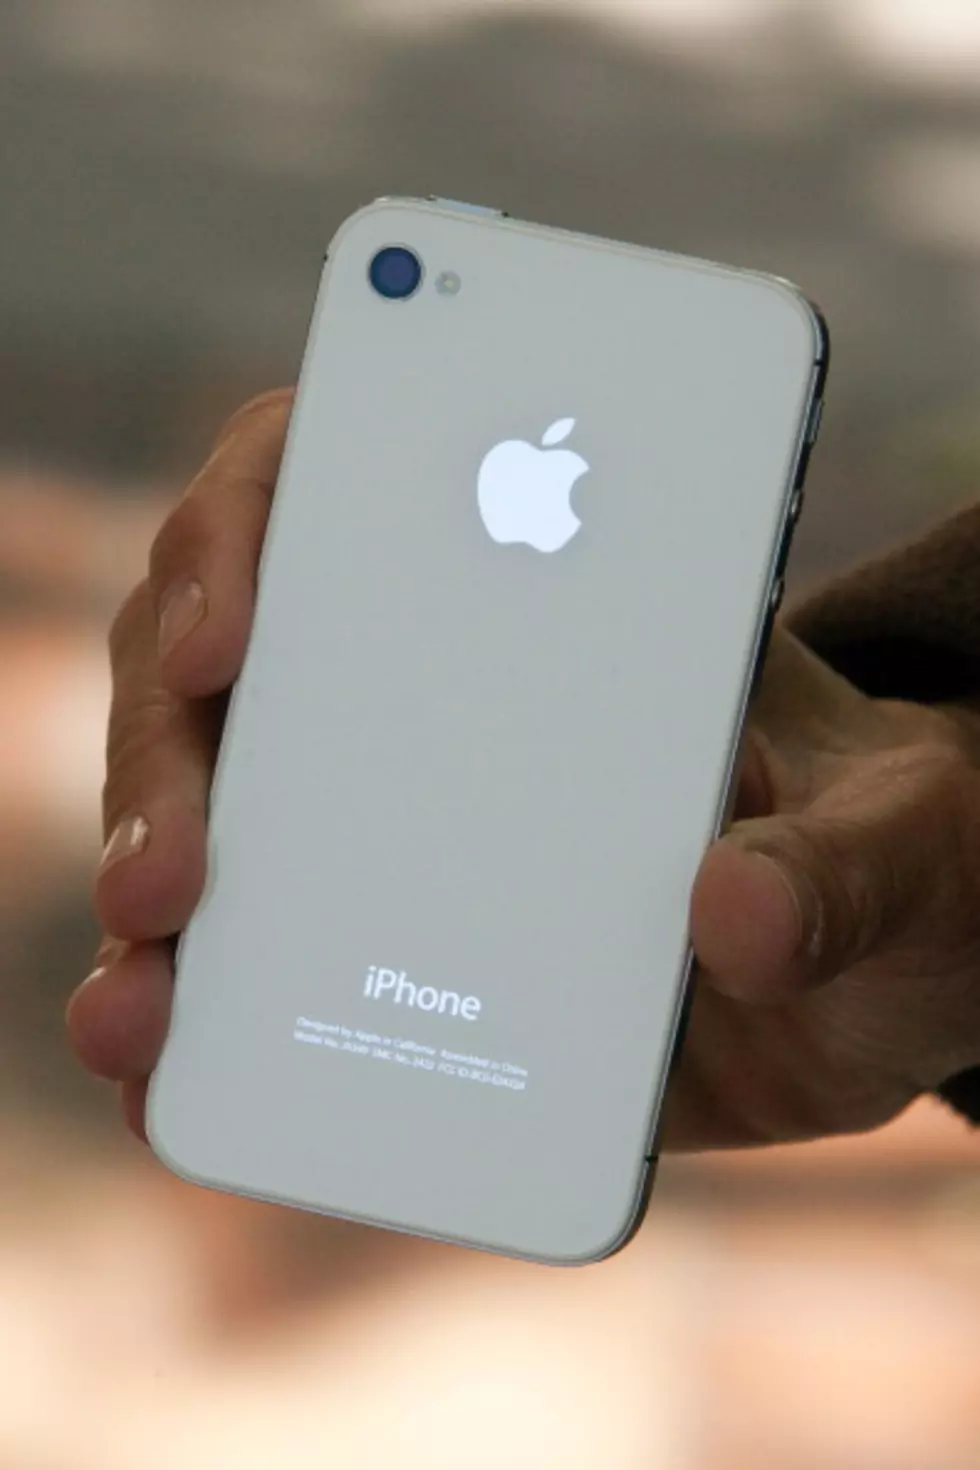 iPhone 5 Expected to Debut This Week